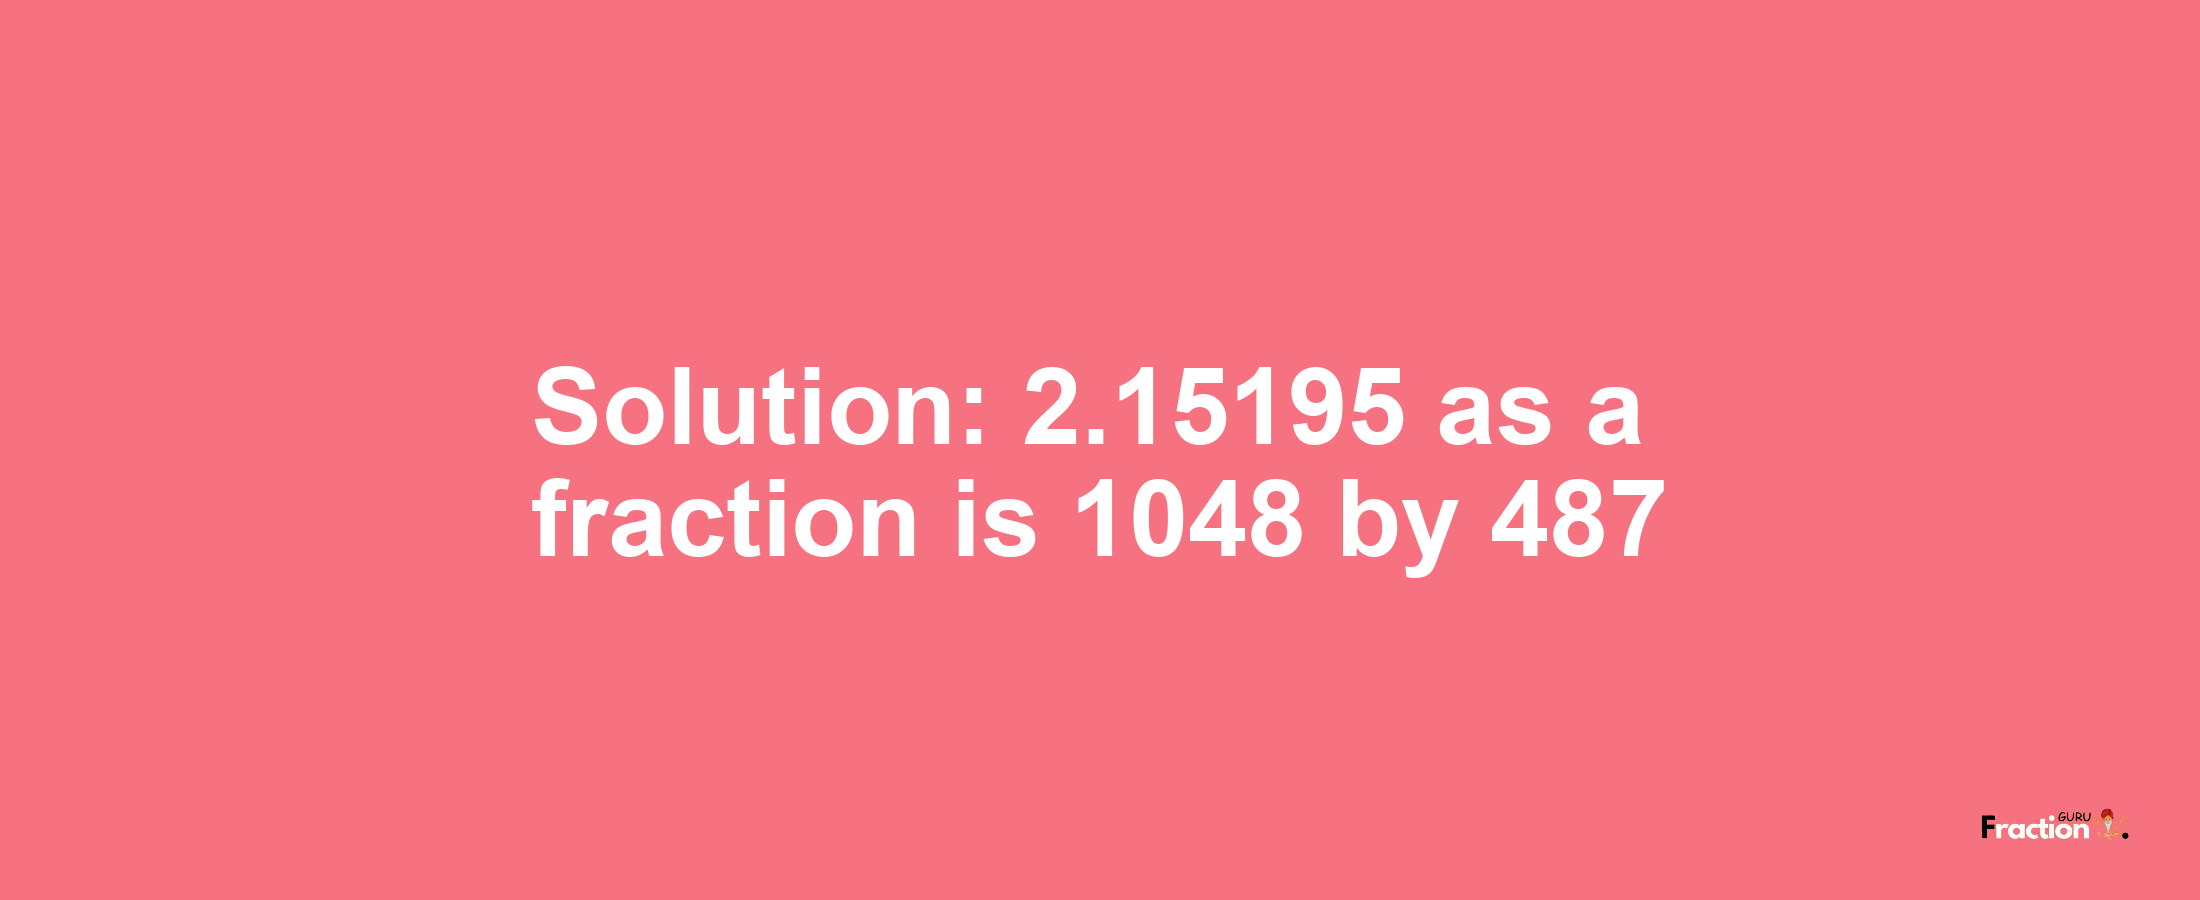 Solution:2.15195 as a fraction is 1048/487